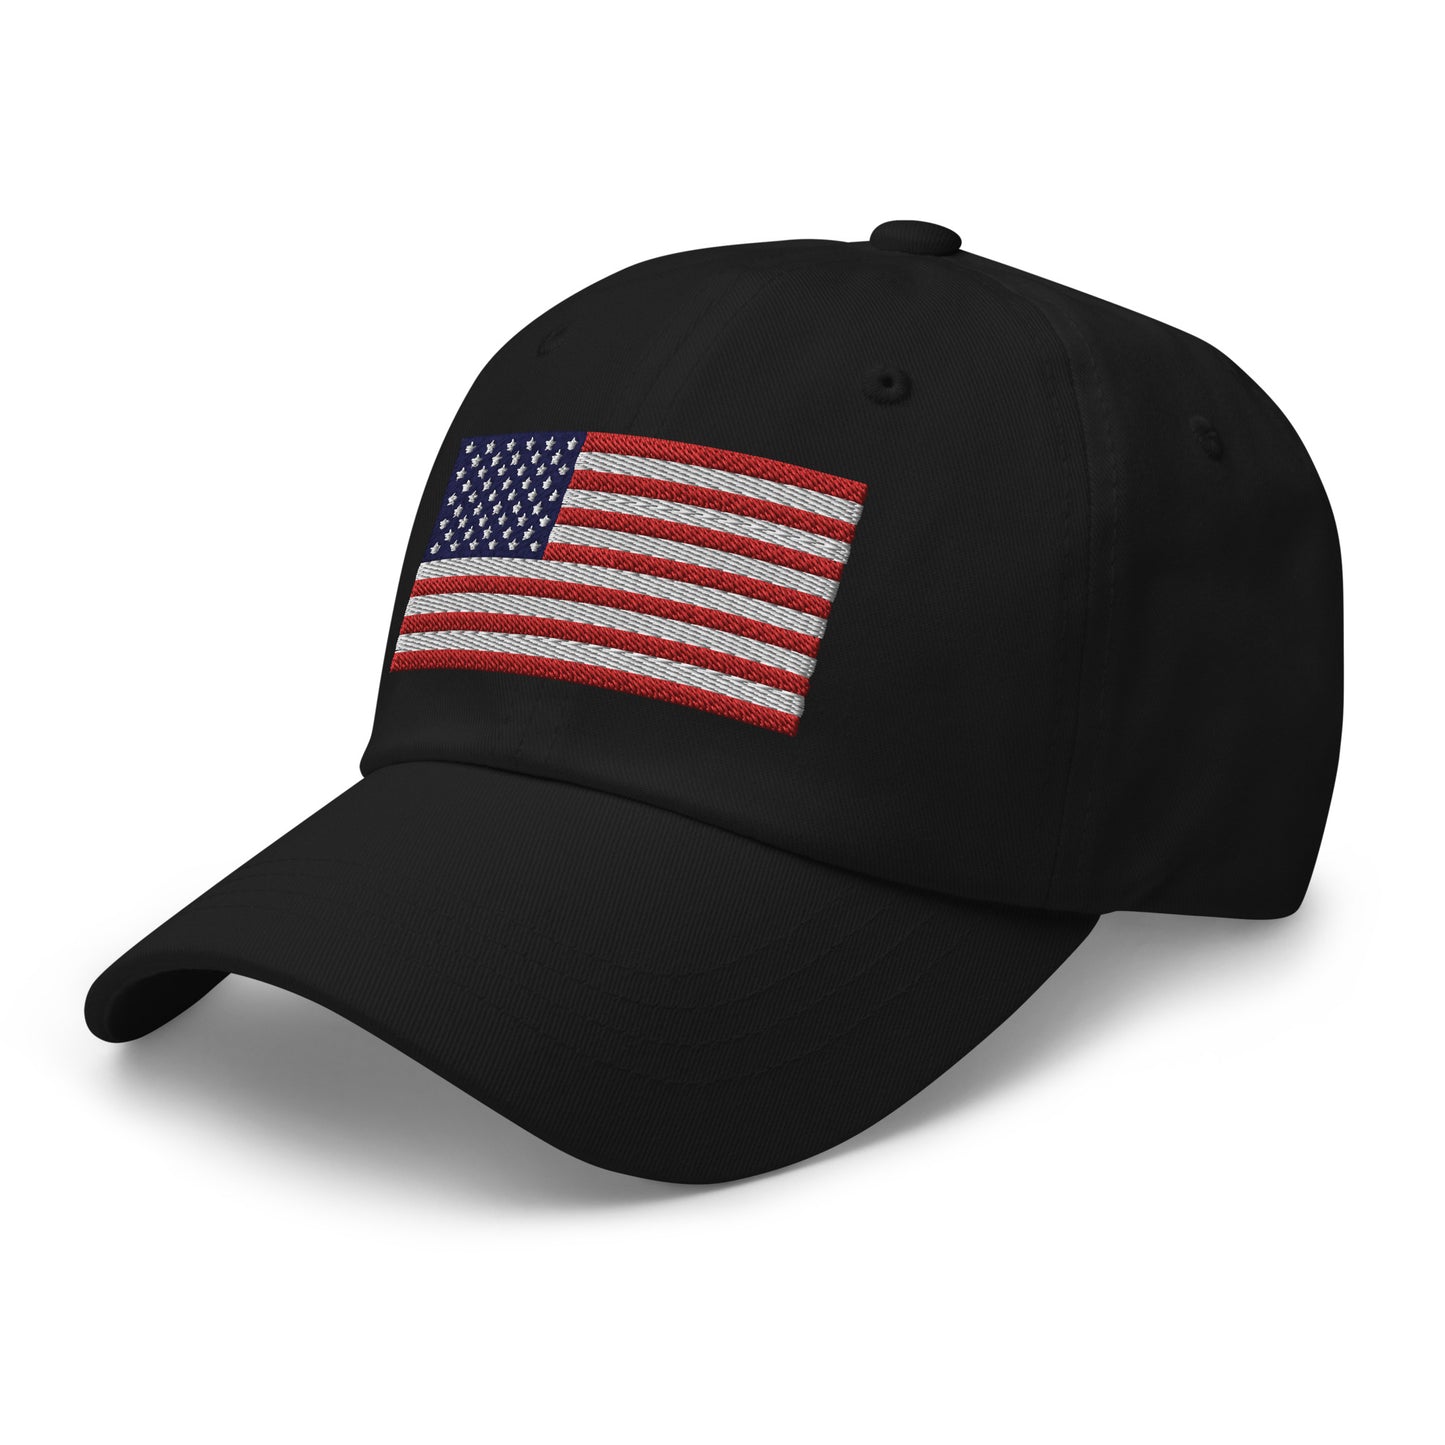 Black Adjustable cotton dad hat with USA embroidery